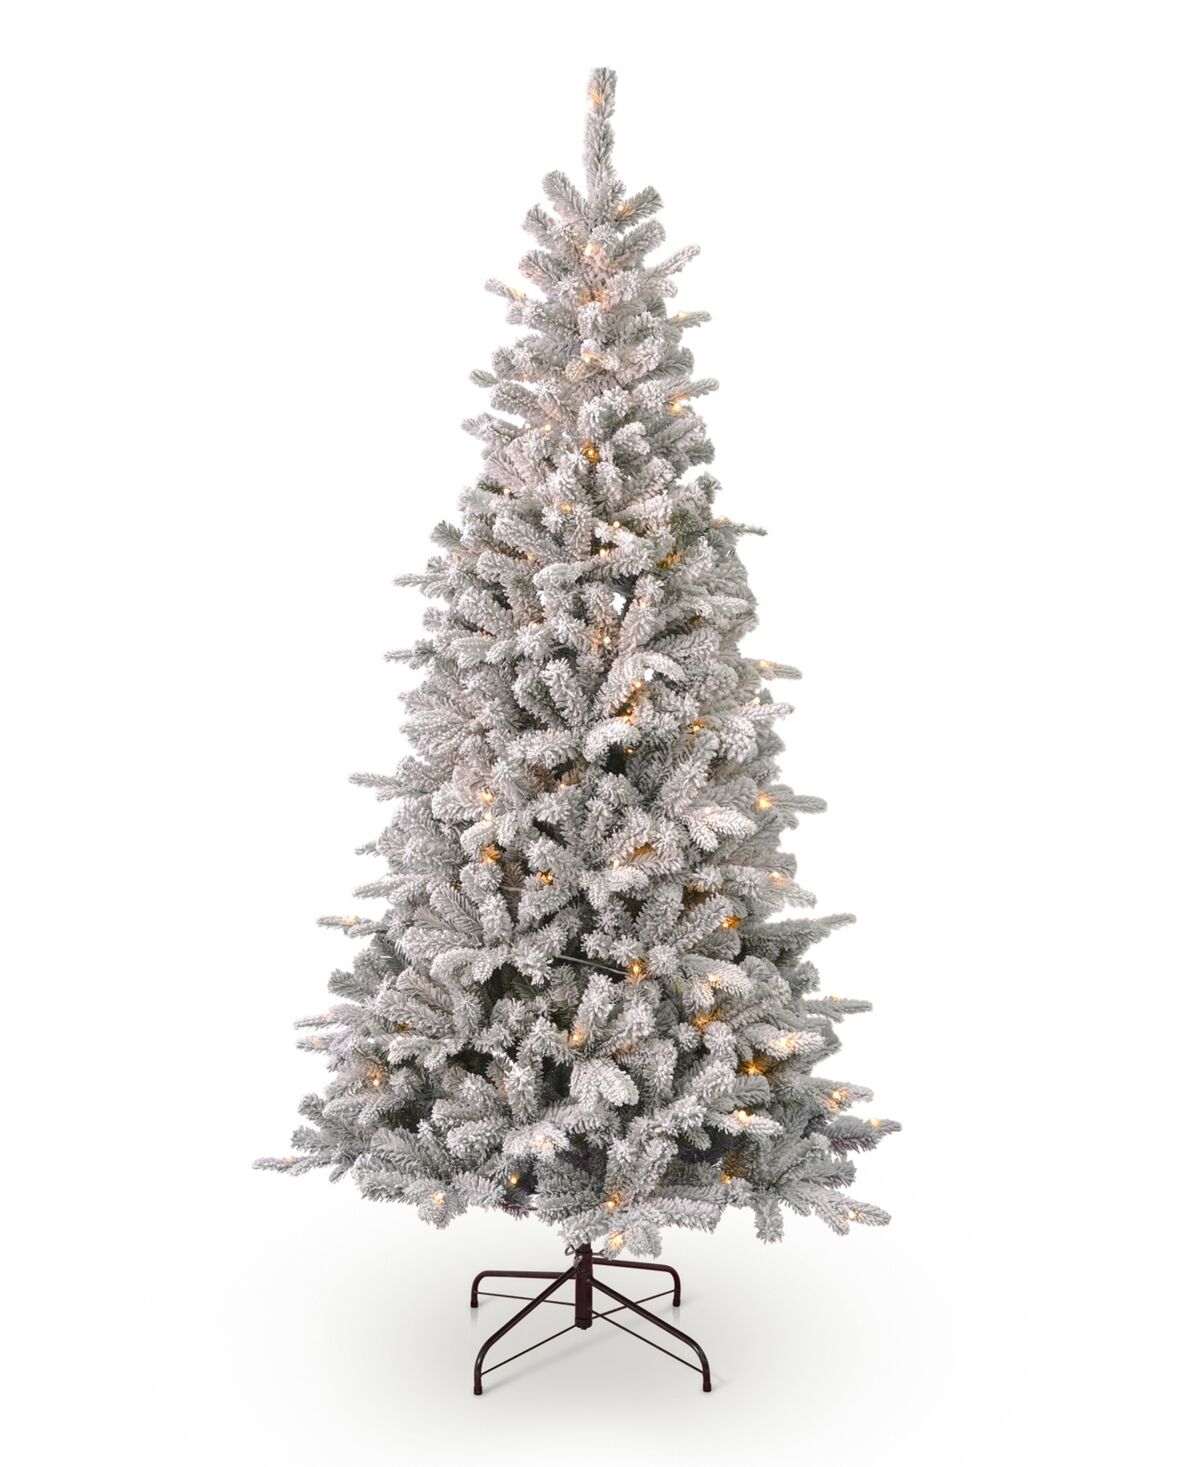 Seasonal Estes Pine Flocked Pre-Lit 7' Pe, Pvc Tree with Metal Stand, 1231 Tips, 200 Led Lights and Remote - White